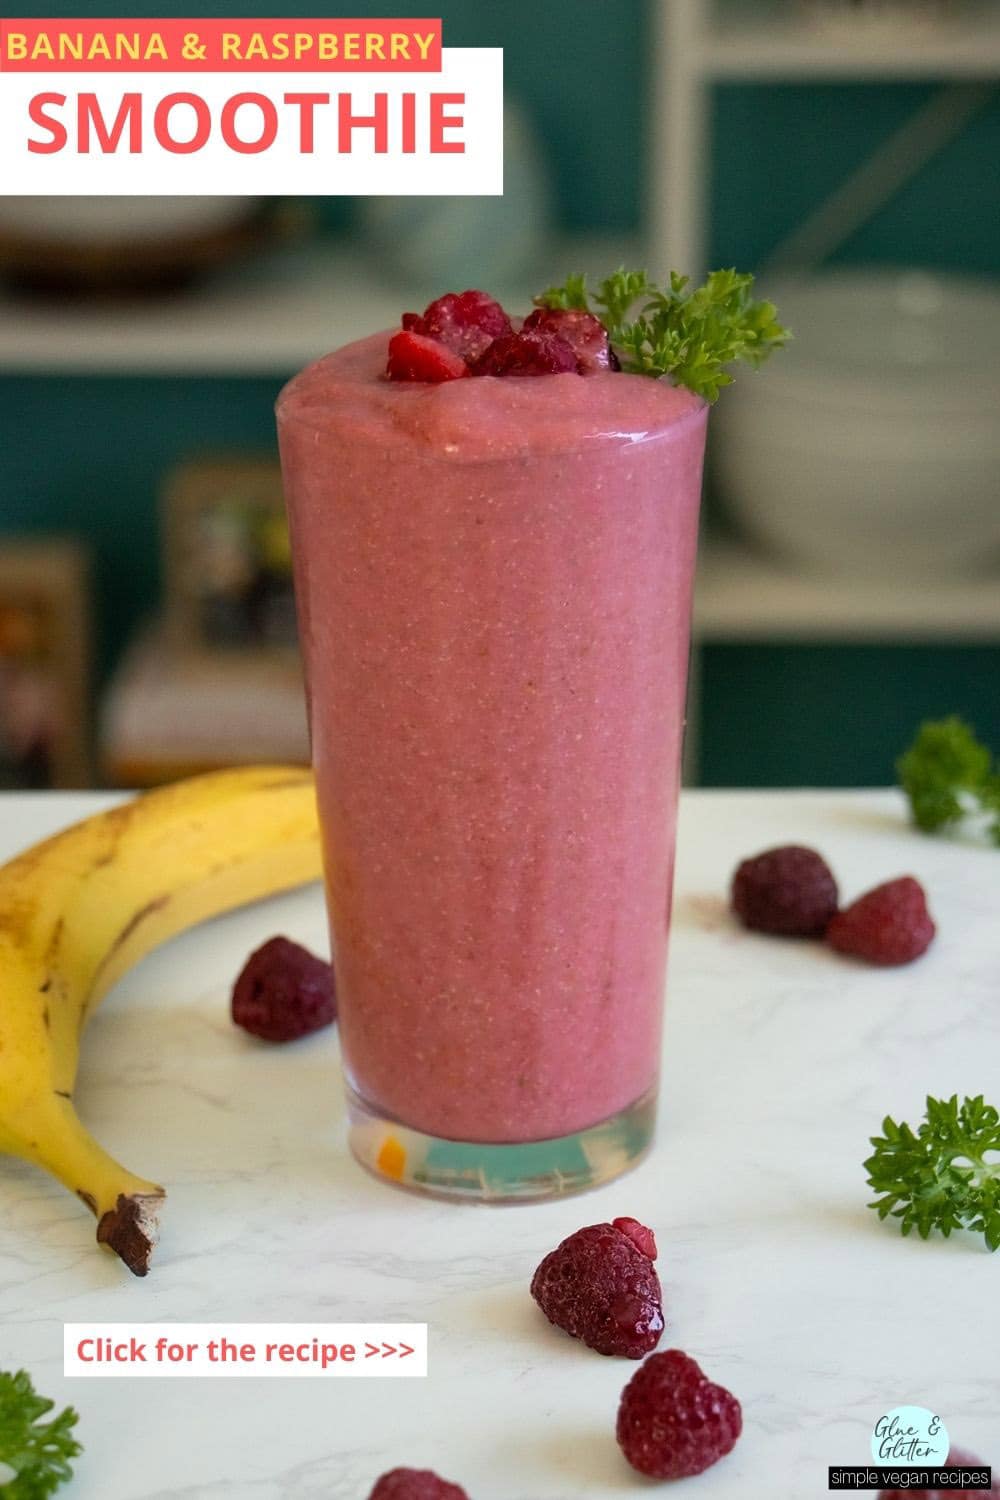 banana and raspberry smoothie in a glass on a white table surrounded by fruit and parsley, text overlay